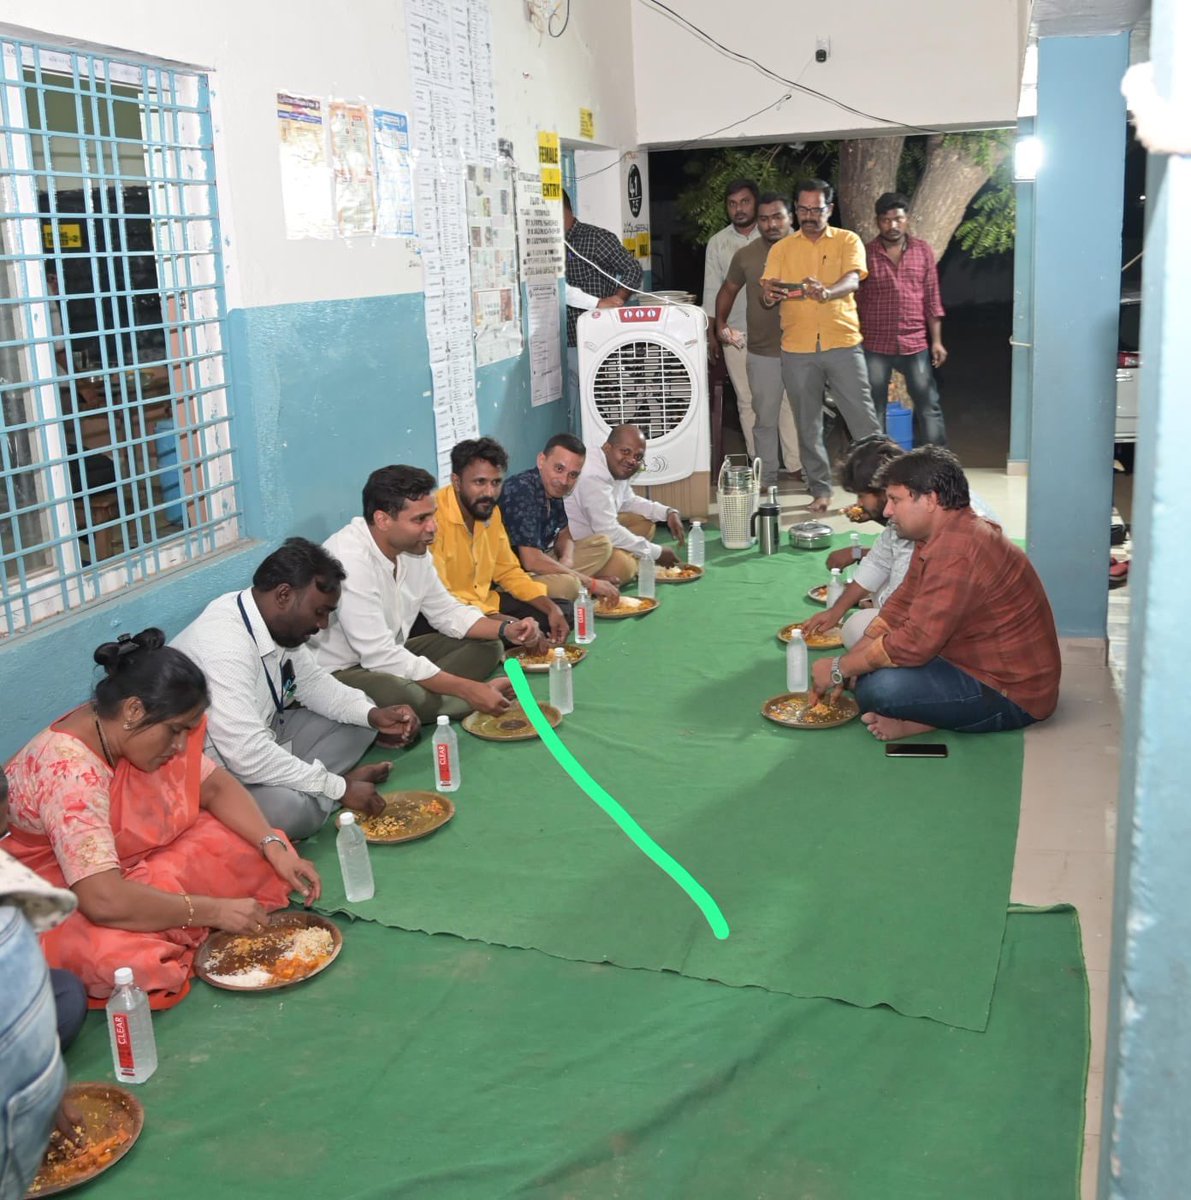 Yesterday Peddapalli District collector visited polling stations at Peddapalli town and had dinner with polling staff.. Collector personally brought food from home and served the polling staff. What an amazing gesture and servant leadership. There are still few good fellows out